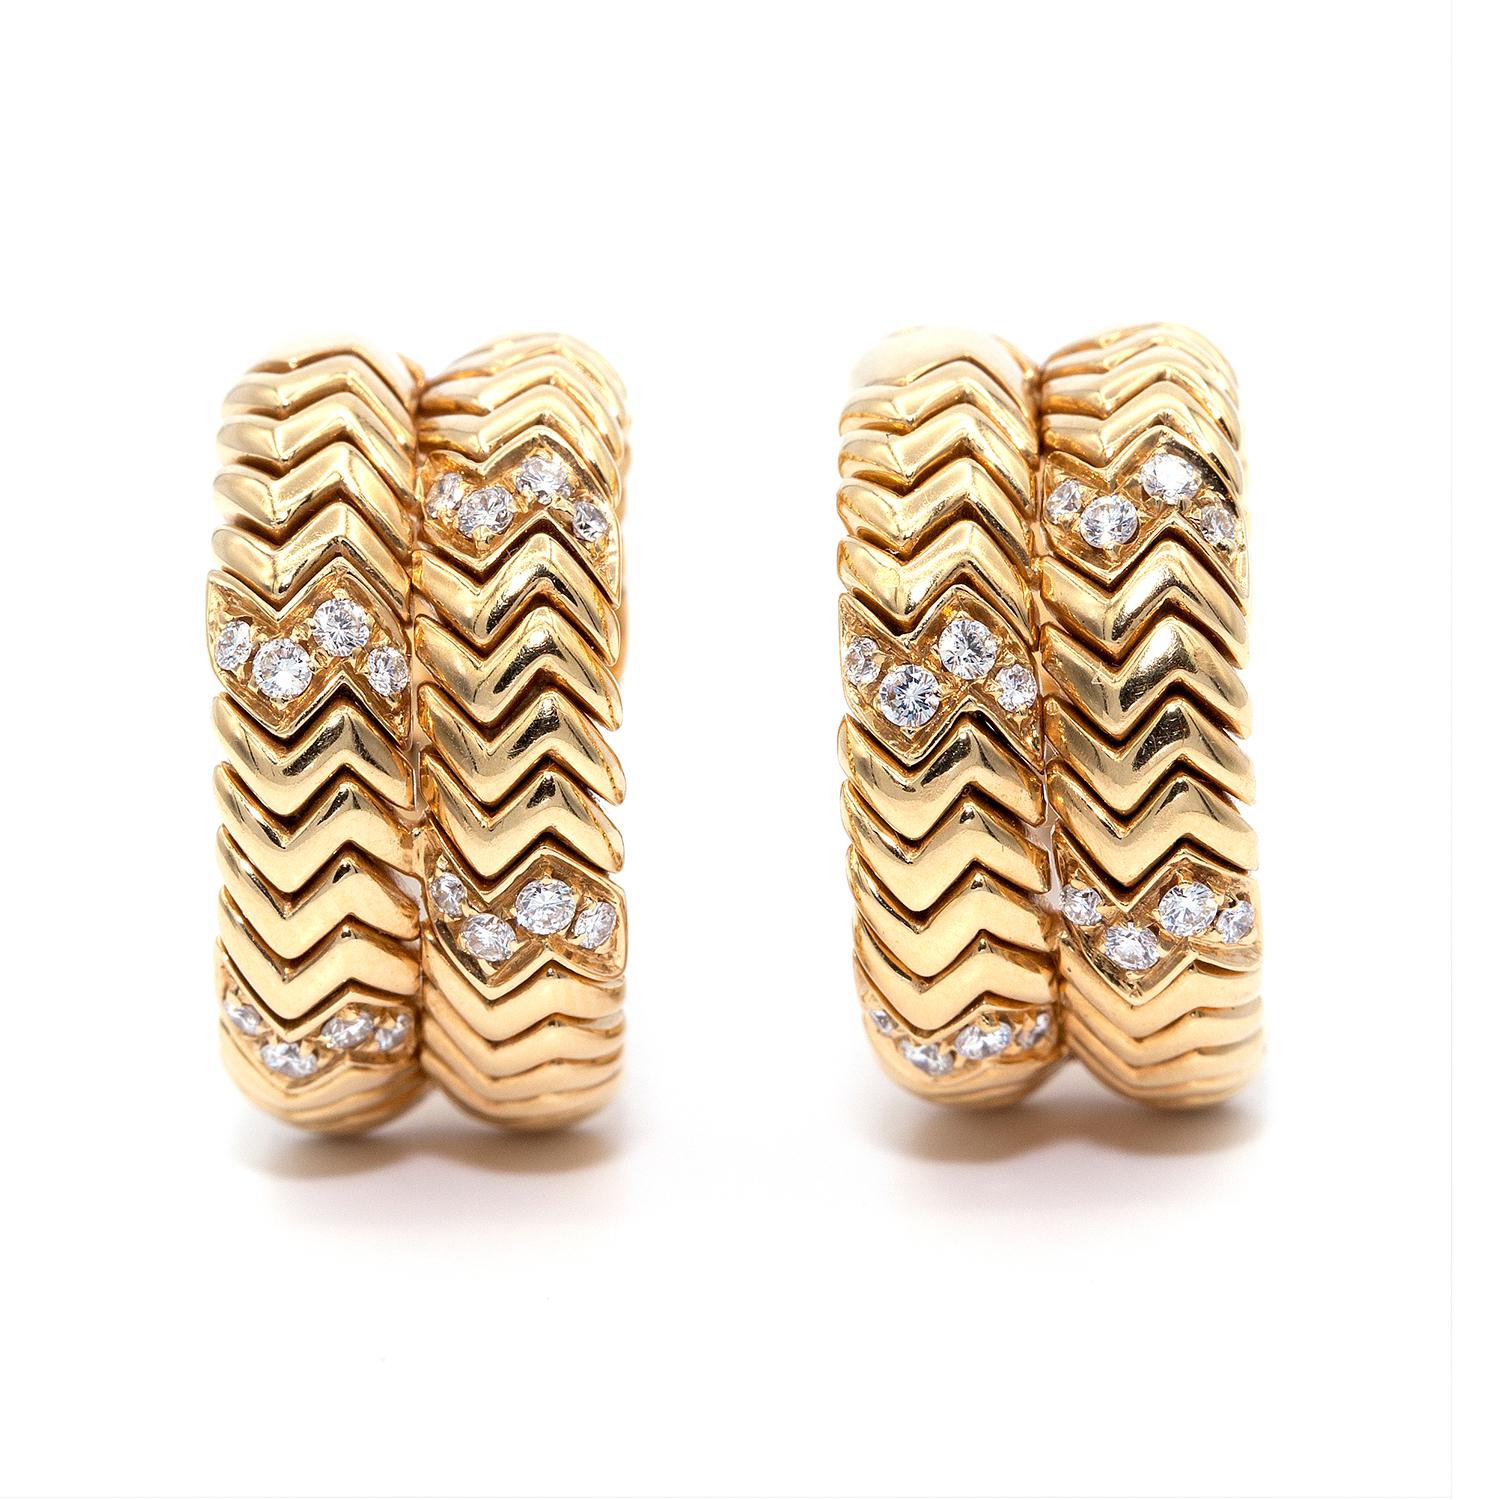 Spiga hoop earrings from Estate BVLGARI. Polished 18-karat yellow gold hardware. Zigzag hoops with round-brilliant cut diamonds. 0.40 total diamond carat weight. Lever backs for pierced or not ears. Made in Italy. Signed Bvlgari and numbered.
Every